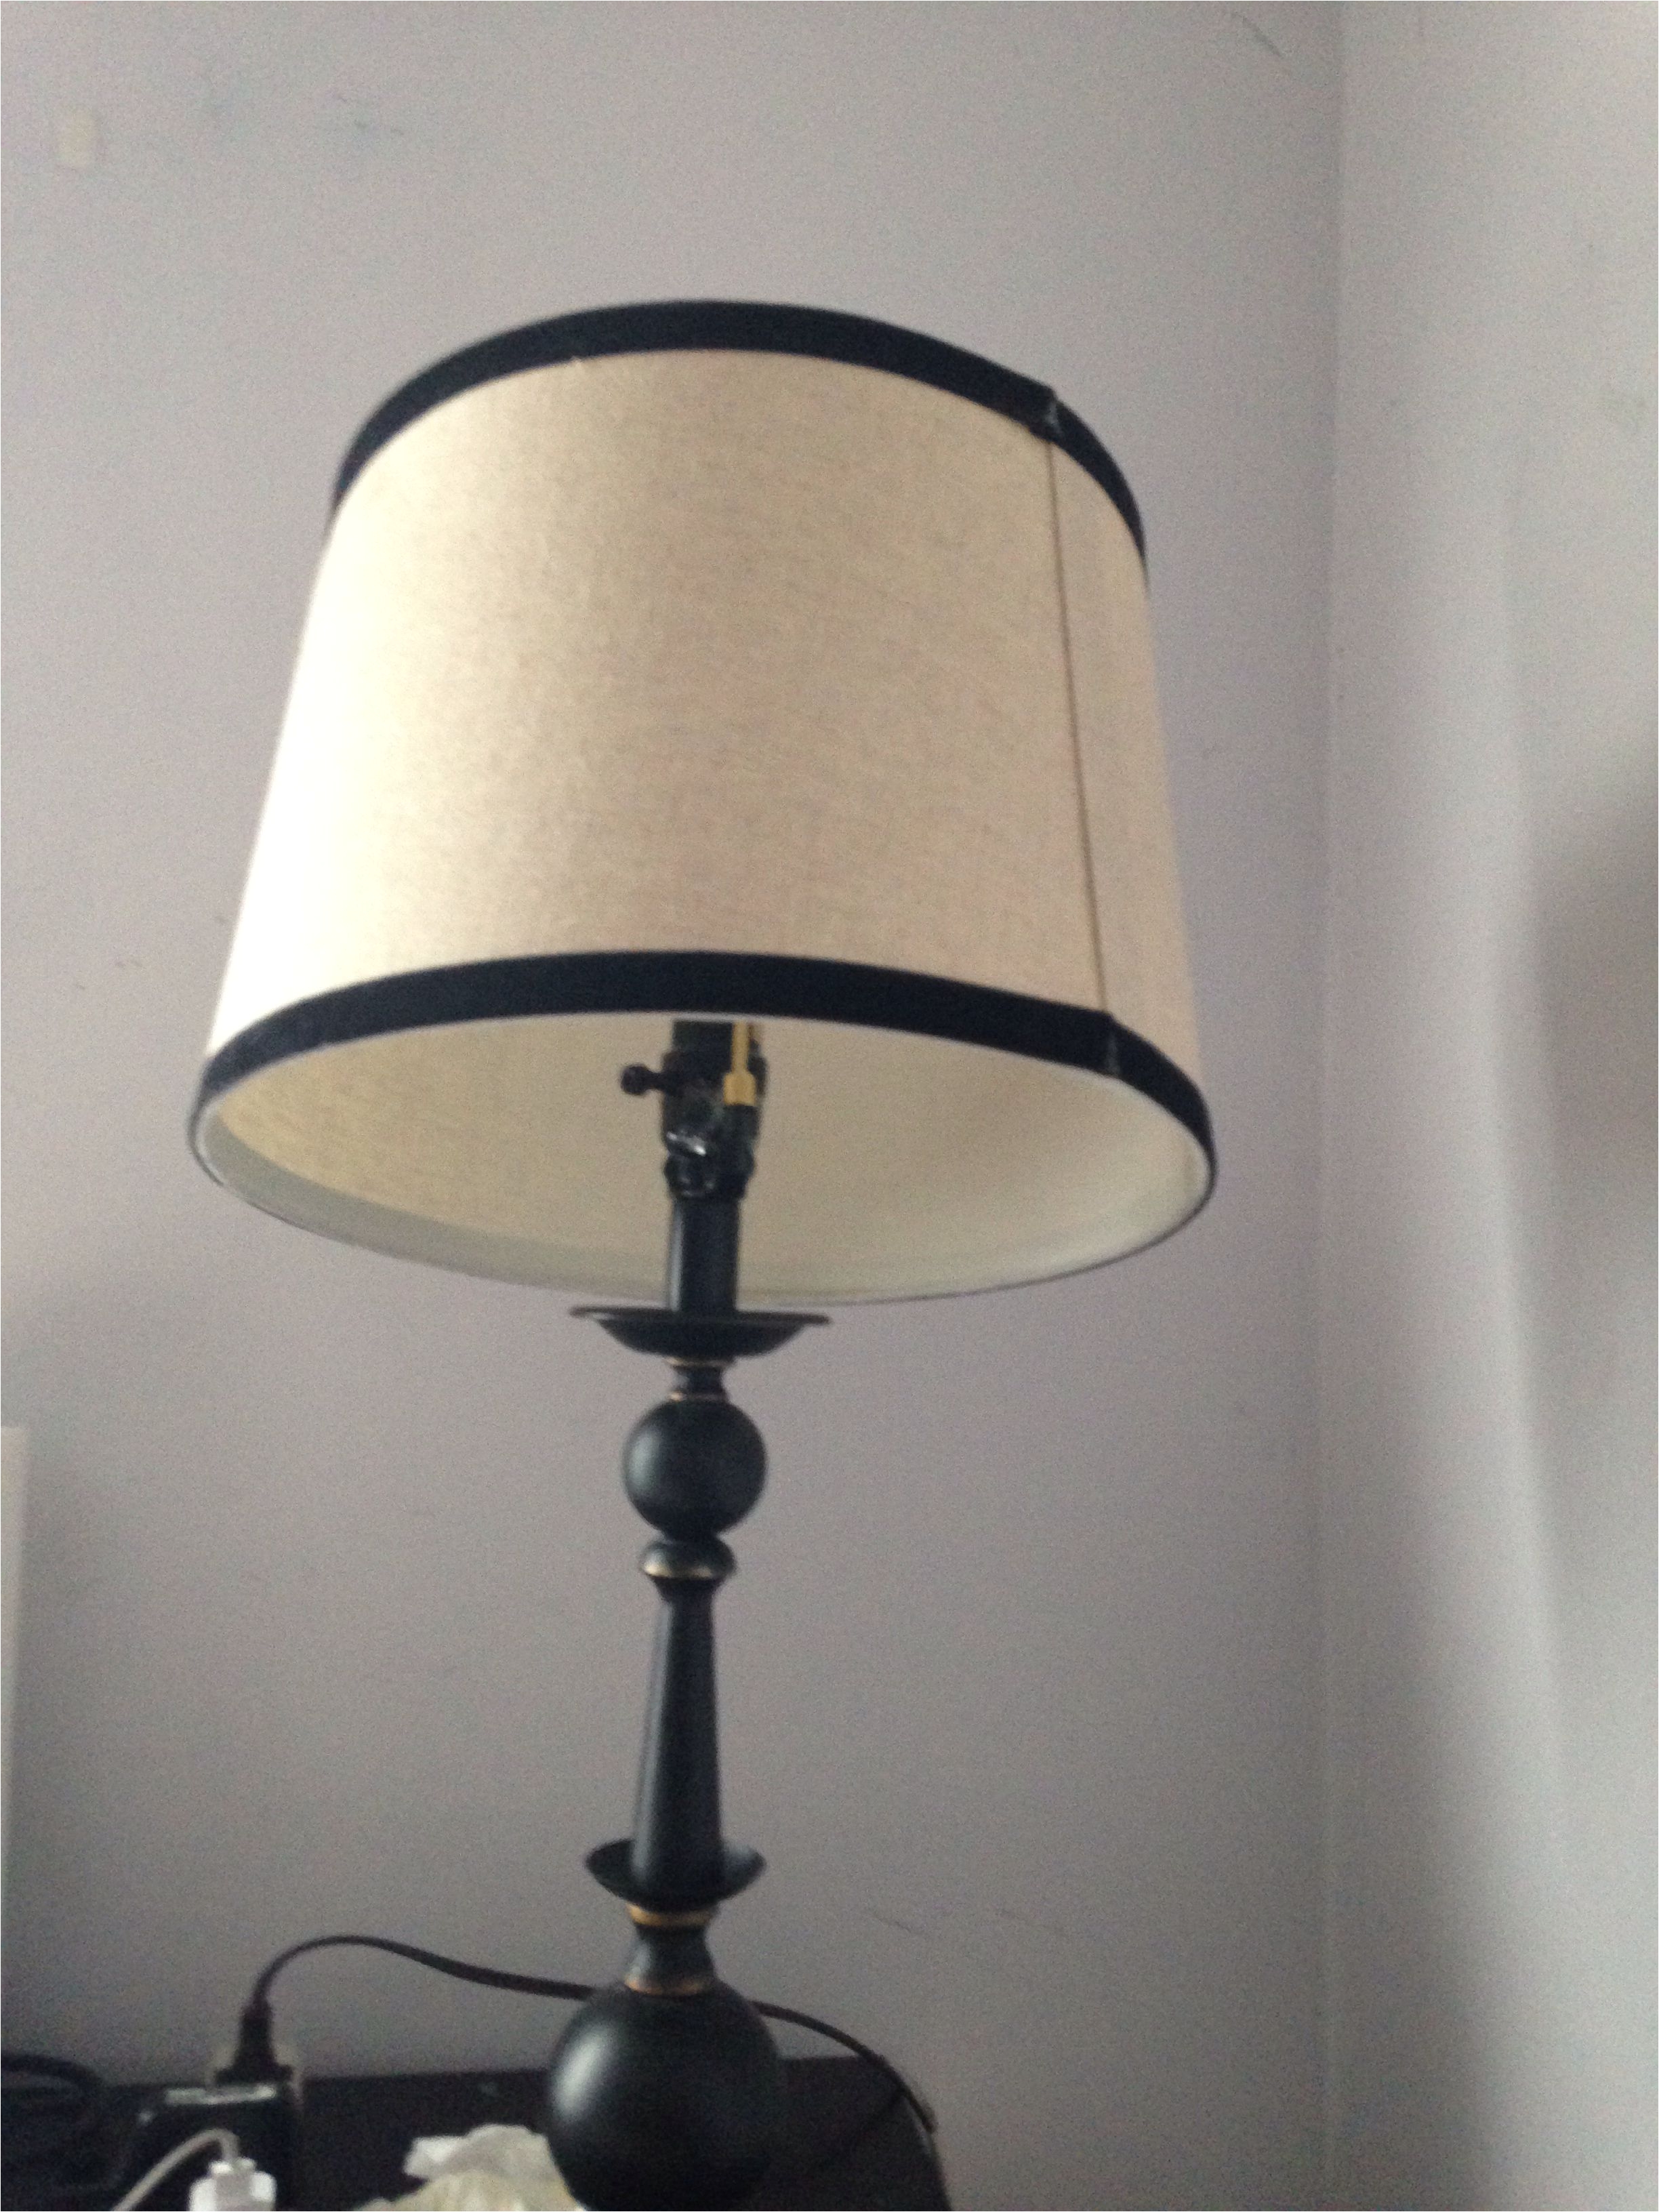 Beach themed Lamp Shades Lampshade Wont Stay Straight Misc 2013 14 Pinterest Lamp